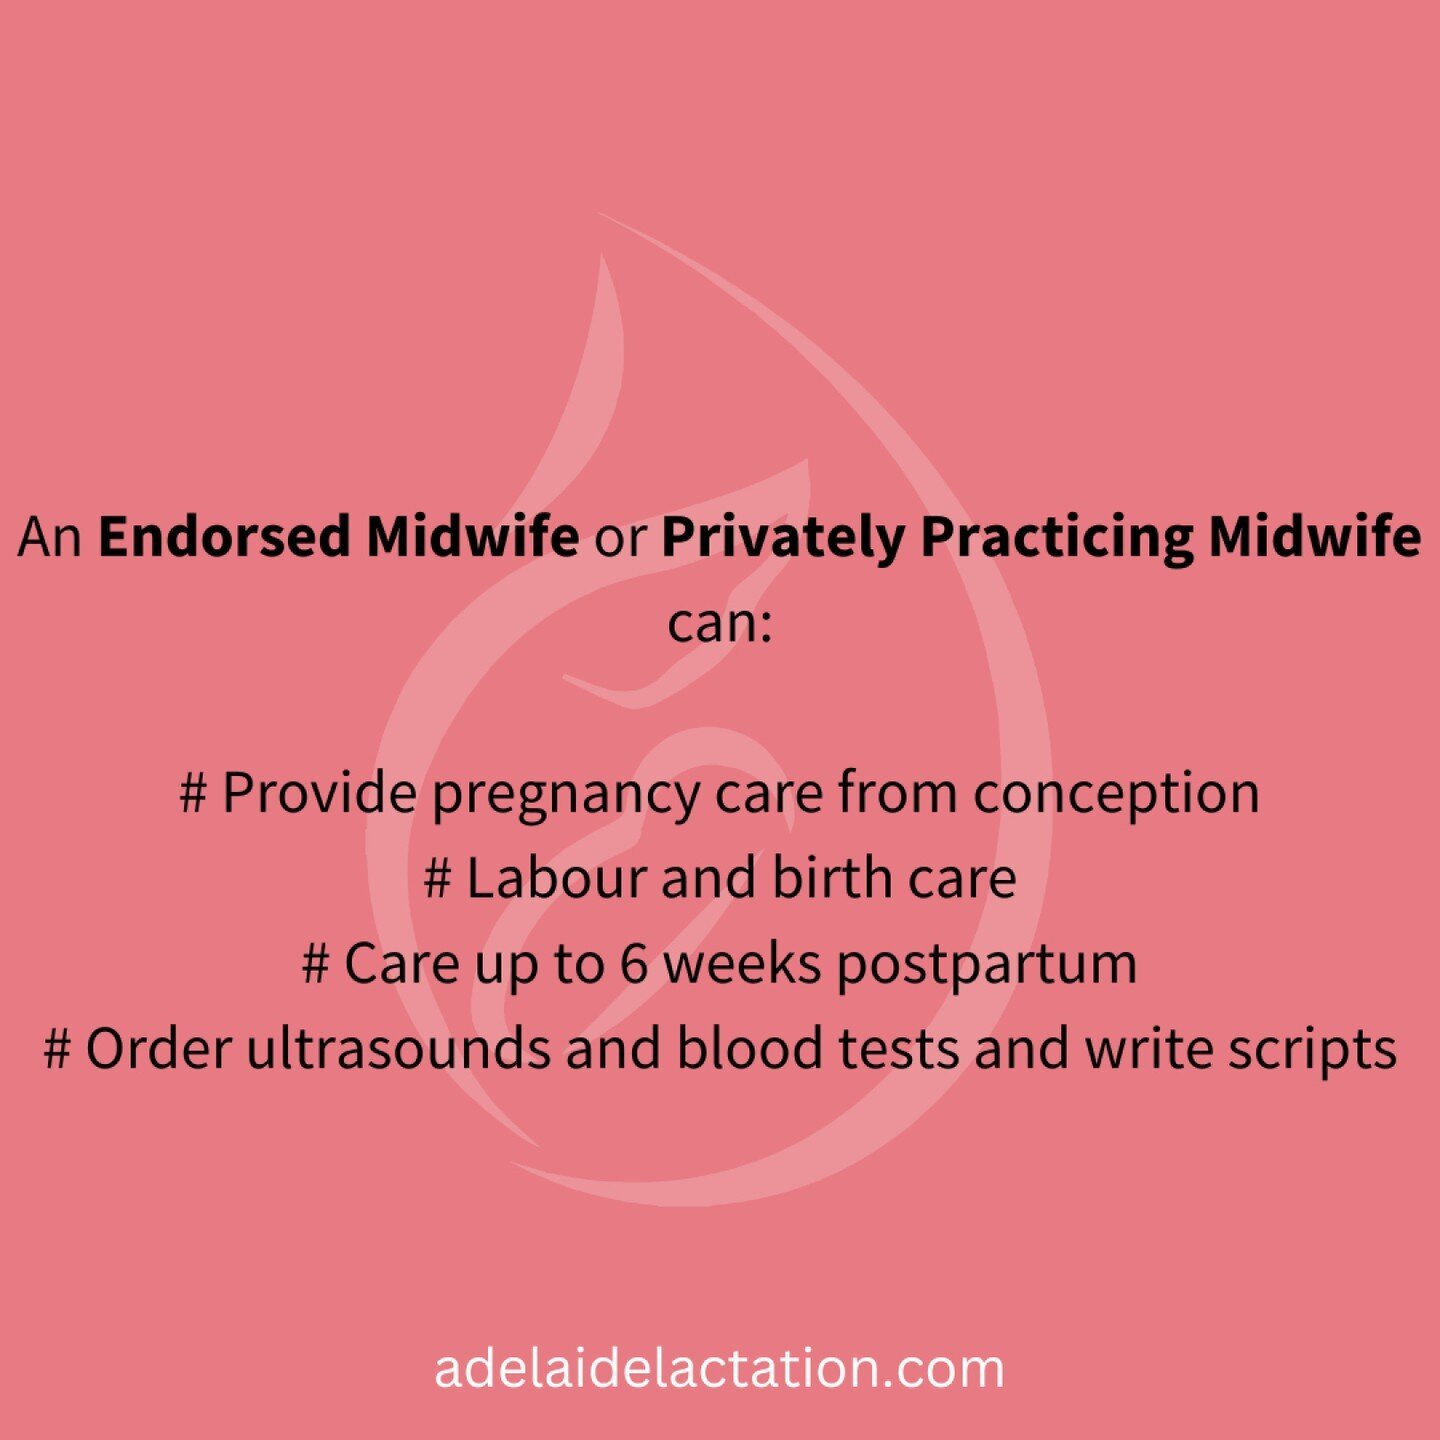 When you chose your maternity care provider consider care from an endorsed (or Privately Practicing) midwife.

You are getting health care from a highly-skilled midwife who can tailor care to your needs.  This includes longer consult times, in-home v